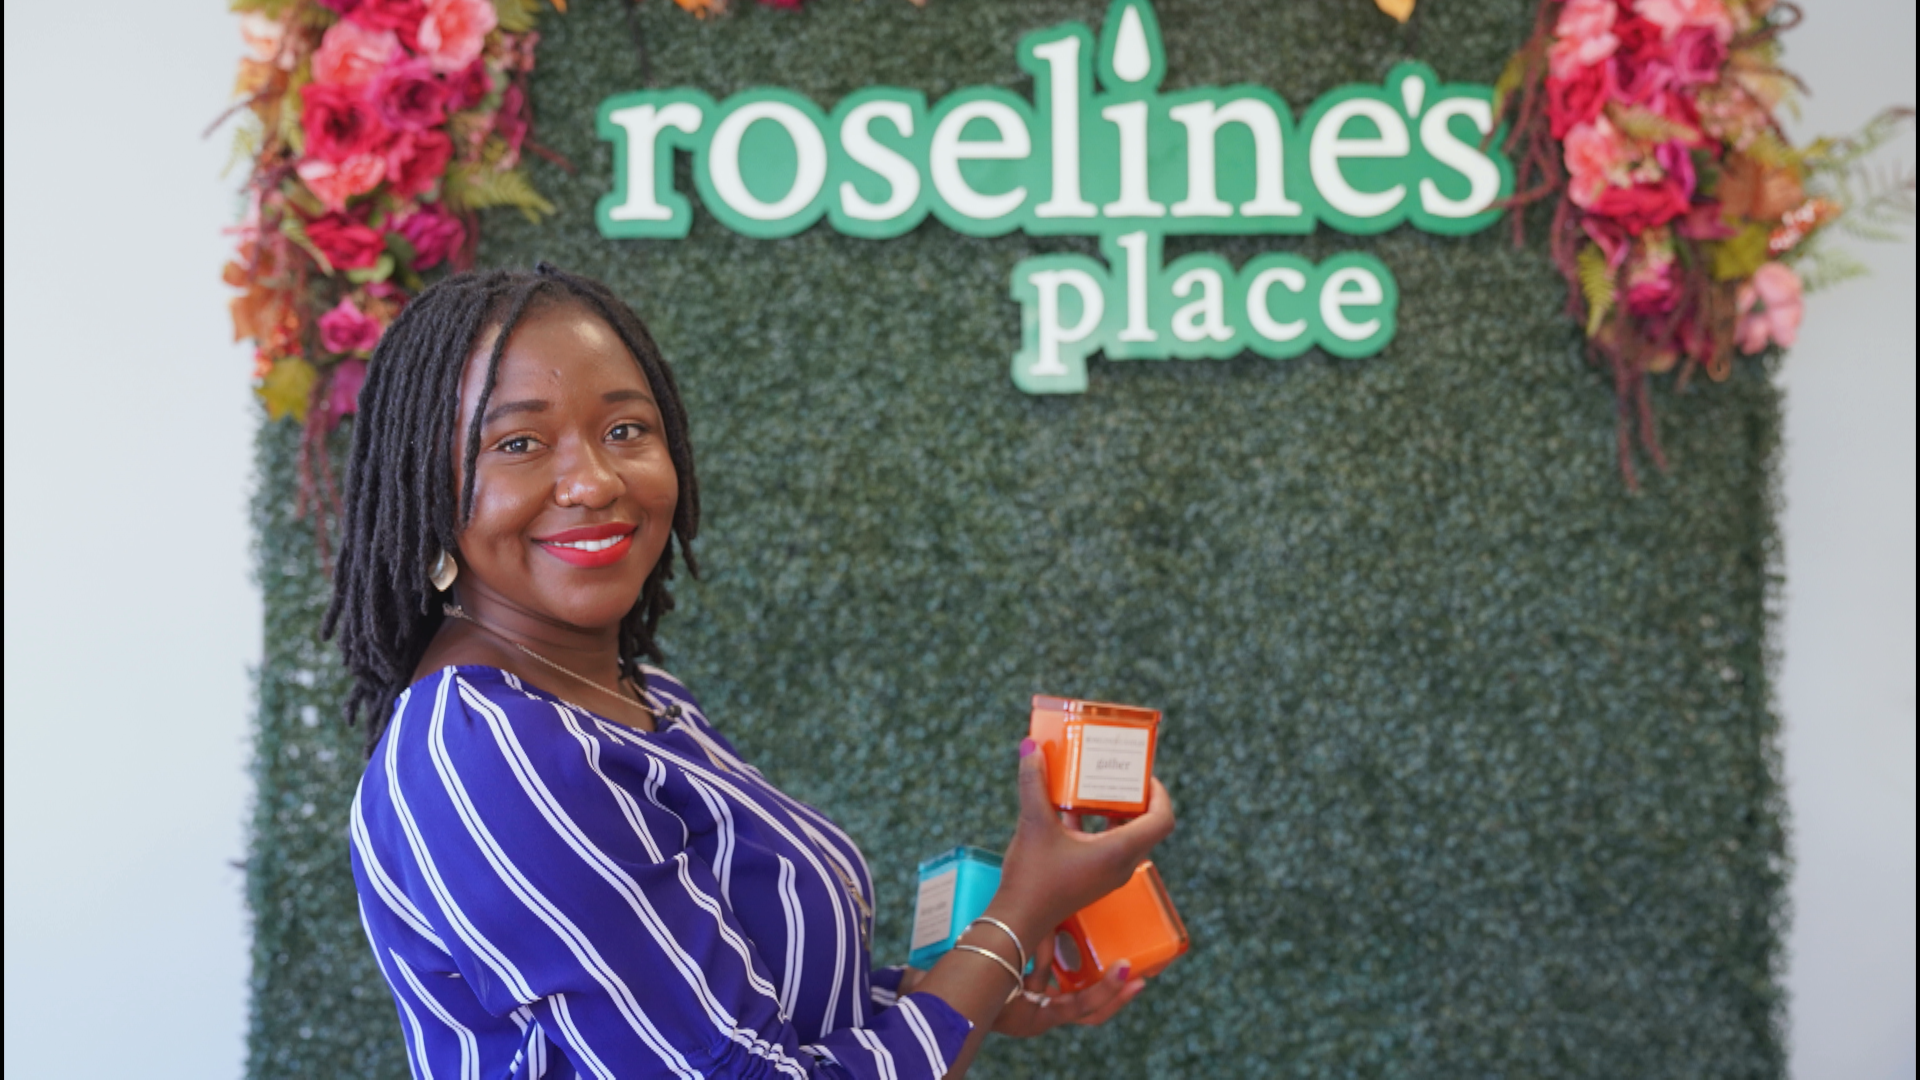 The grand opening for Roseline's Place, located on the corner of Central & Lowry Avenues NE, will take place Sept. 30.